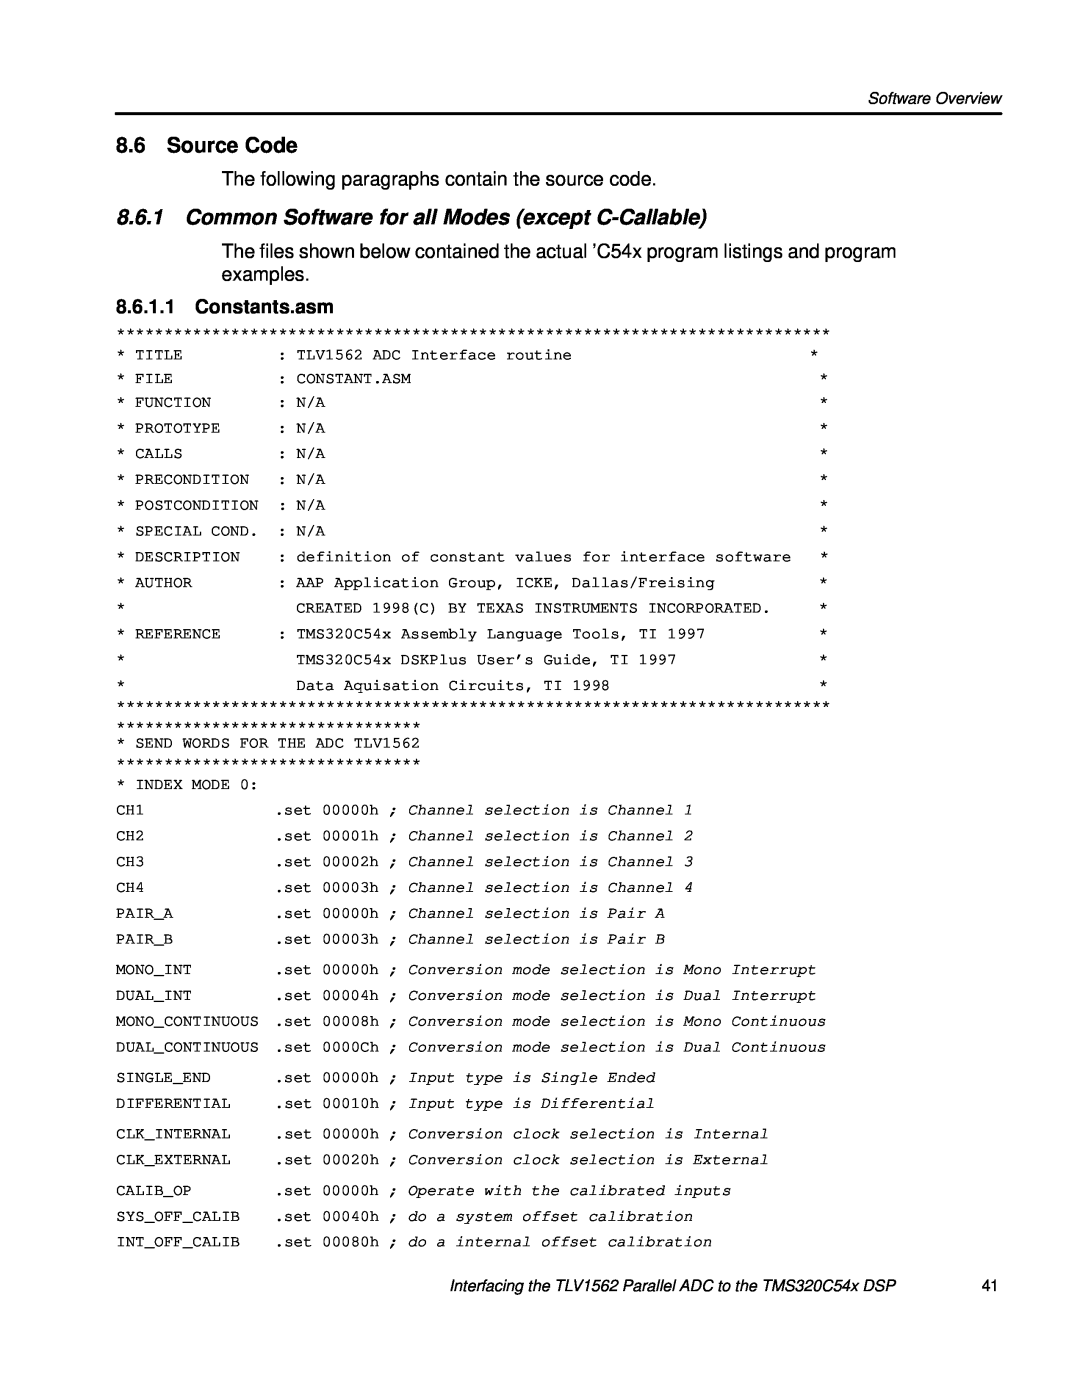 Texas Instruments TLV1562 Source Code, Common Software for all Modes except C-Callable, Constants.asm, Software Overview 